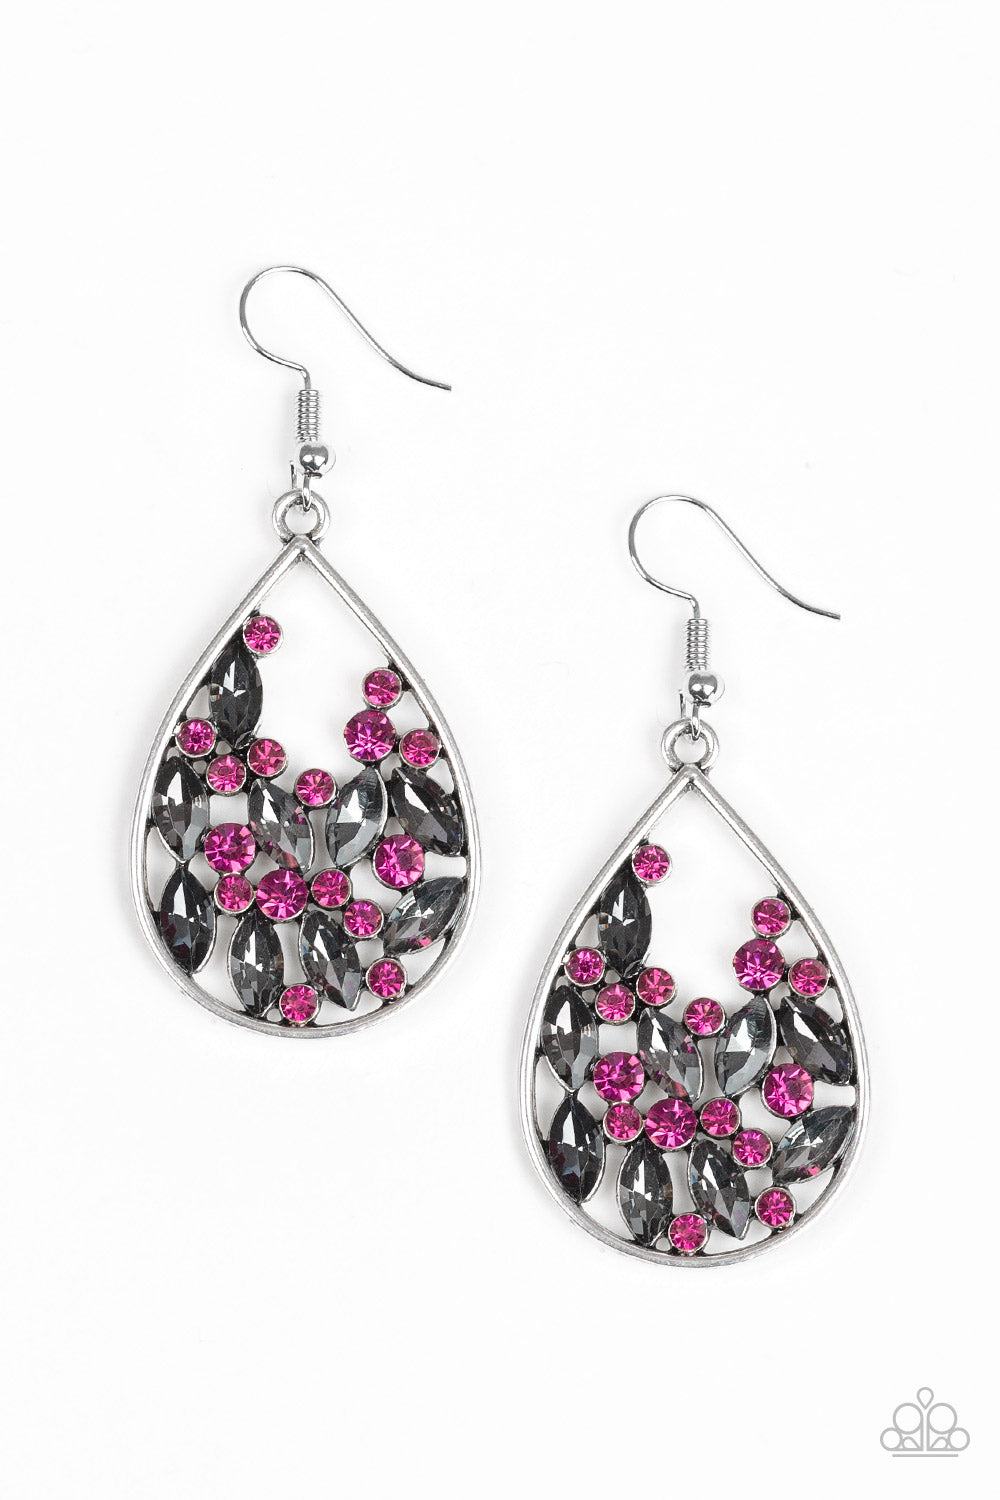 Cash or Crystal? - Pink earring 599